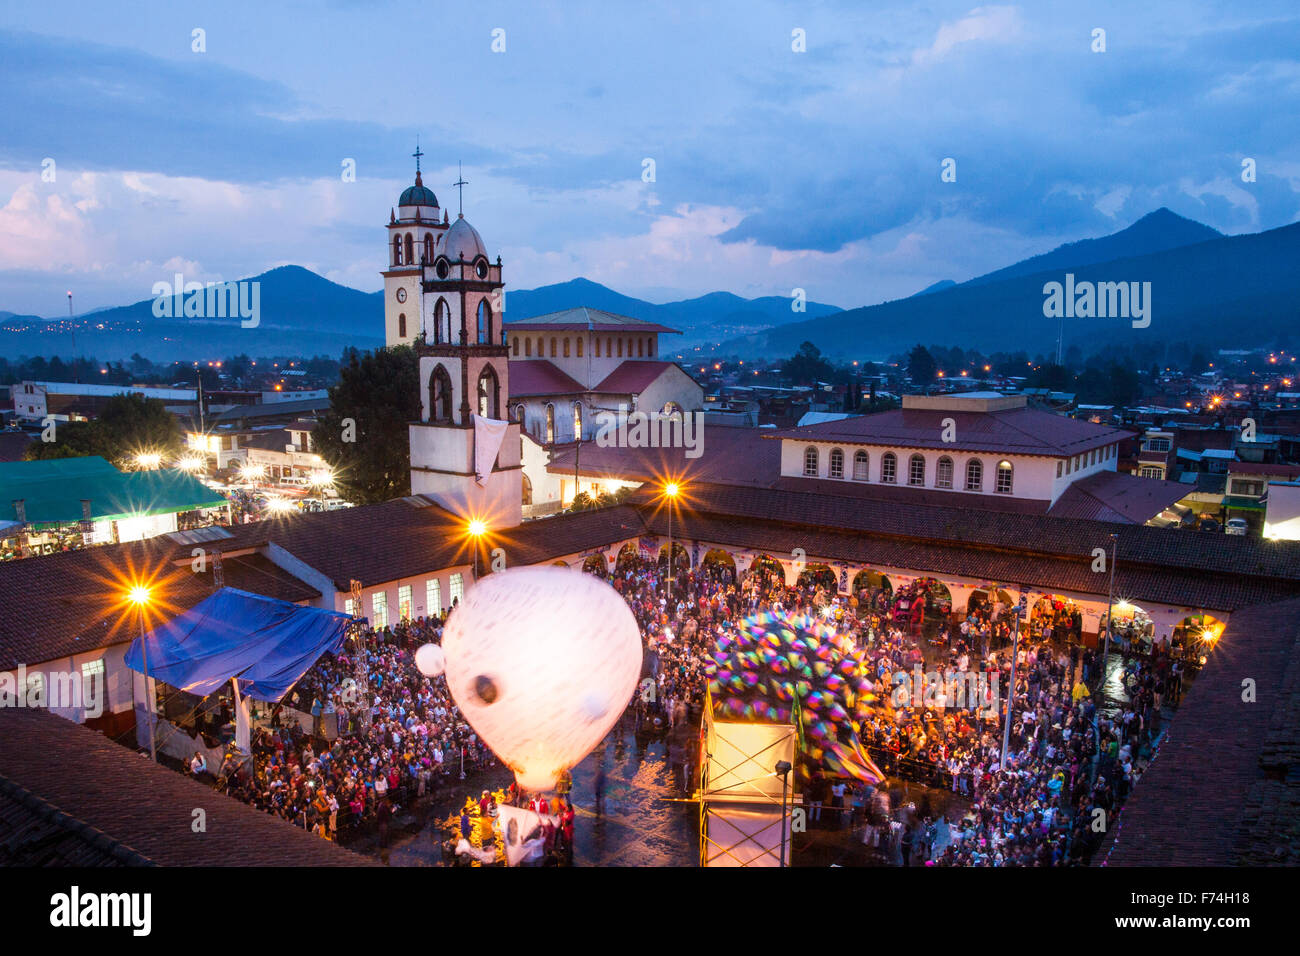 The plaza of Paracho, Michoacan, Mexico filled with spectators and large sky lanterns during the Globo Cantoya festival. Stock Photo